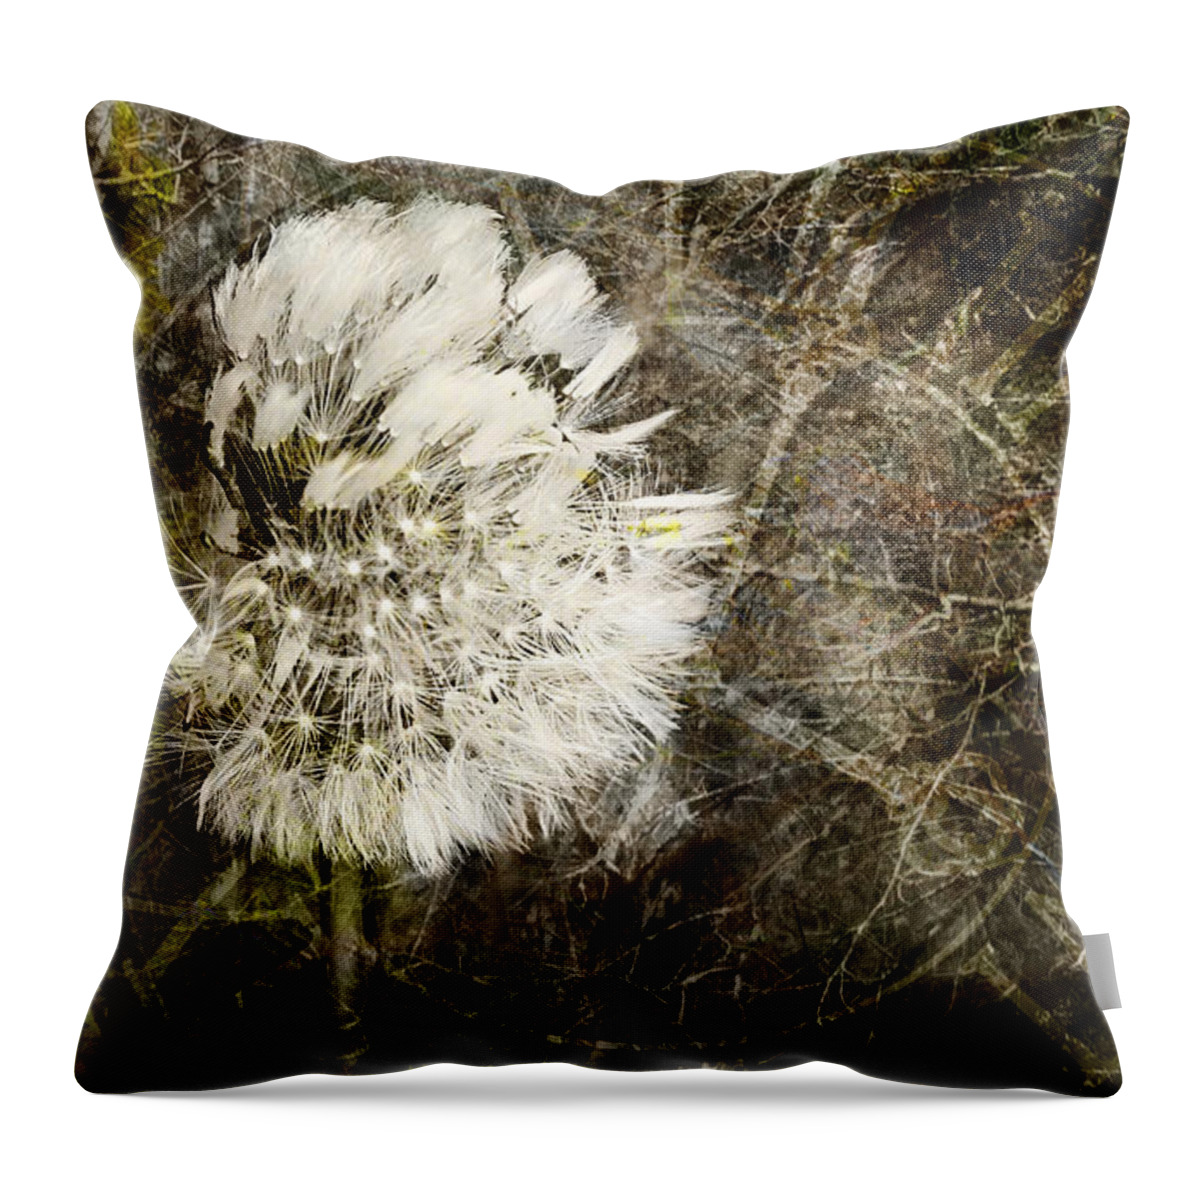 Dandelion Throw Pillow featuring the photograph Dandelions Don't Care About the Time by Belinda Greb